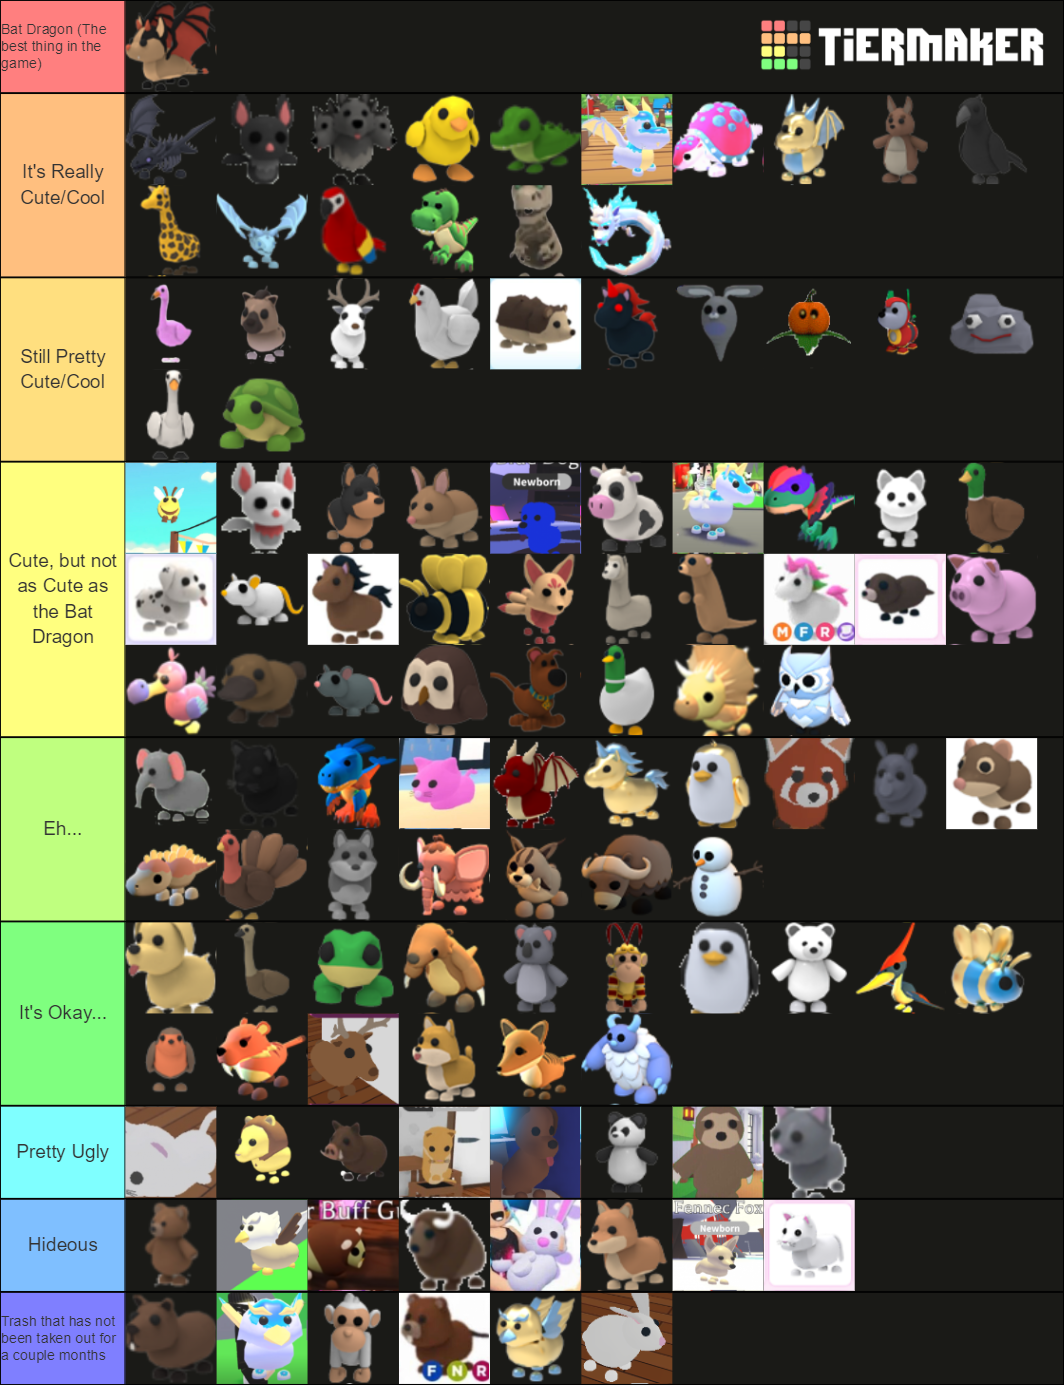 My Adopt Me pet tier list based off looks. What do you think about